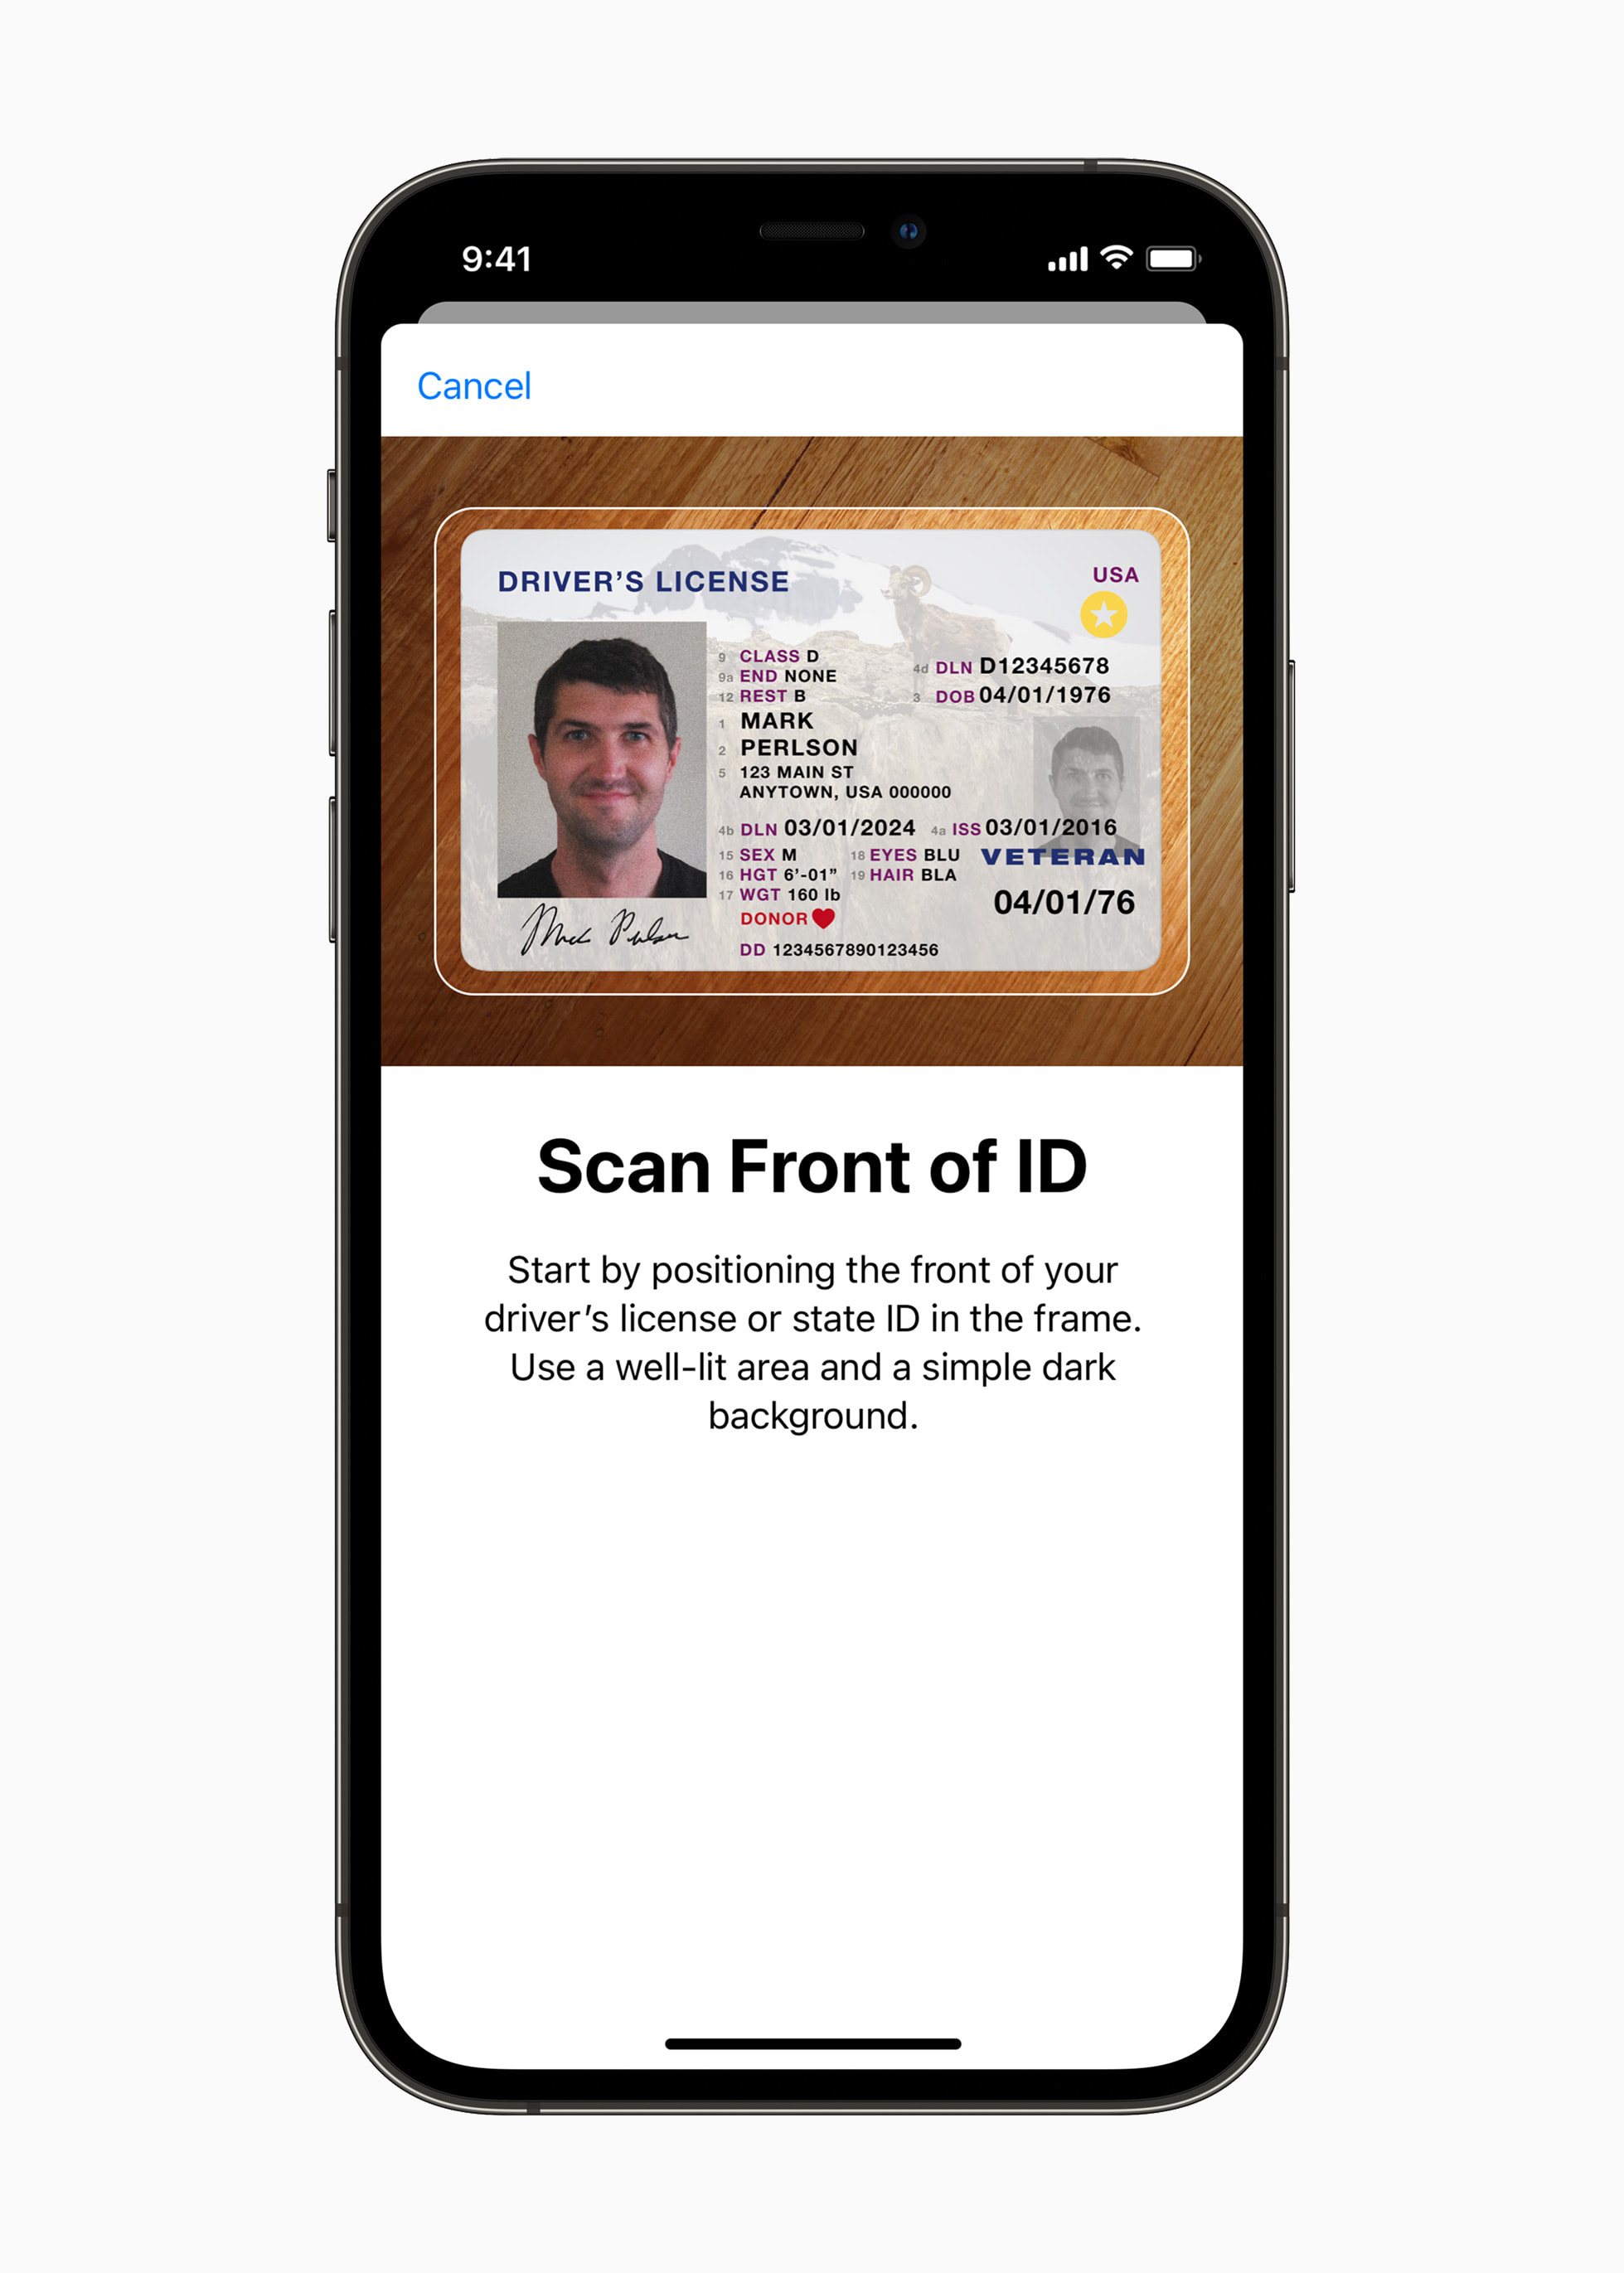 Digital ID and driver's license on iPhone states